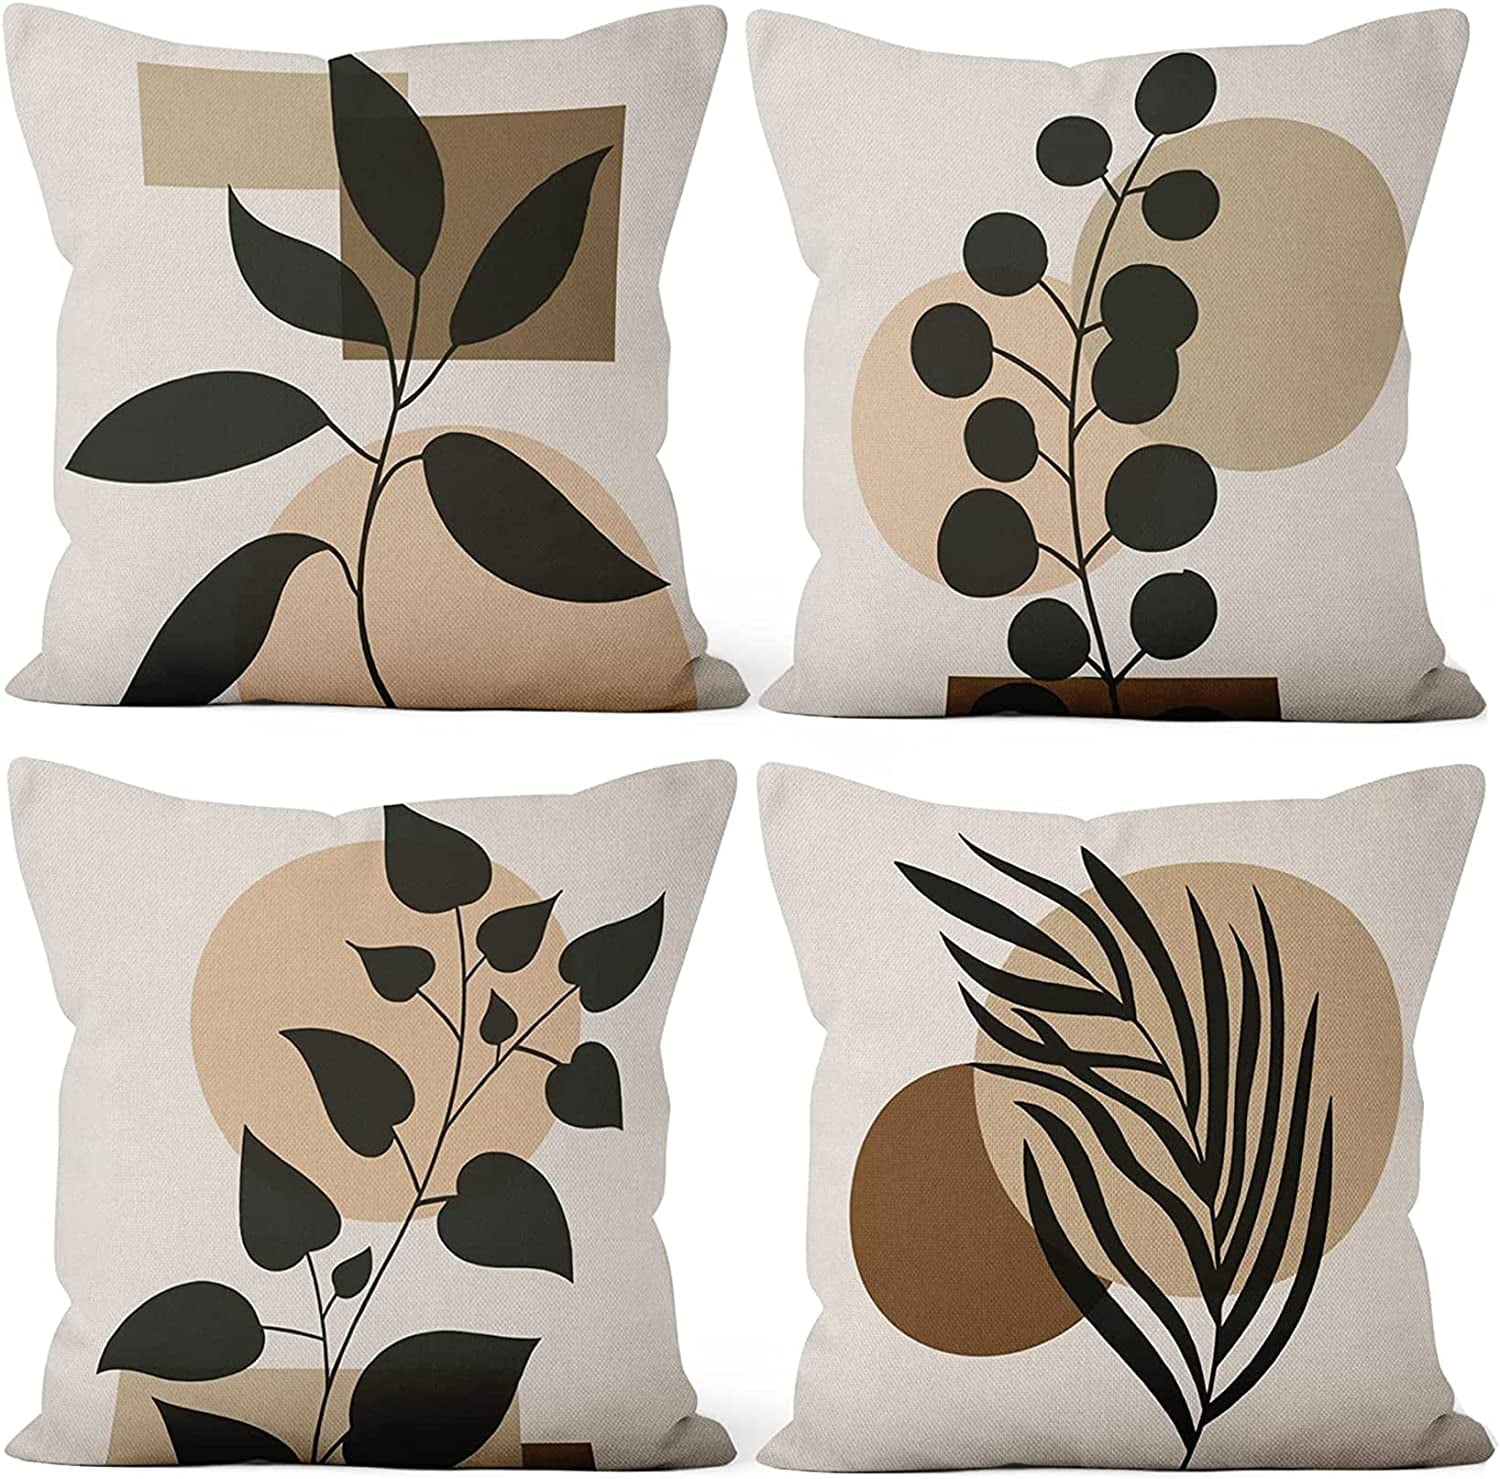  Decorative Throw Pillow Cover, Abstract Rustic Brown Floral  Cushion Cover Soft Cushion Case Pillowcase for Couch Sofa Bedroom Car  Farmhouse Boho Home Decor 12x20 Inch Middle Ages Color Block : Home